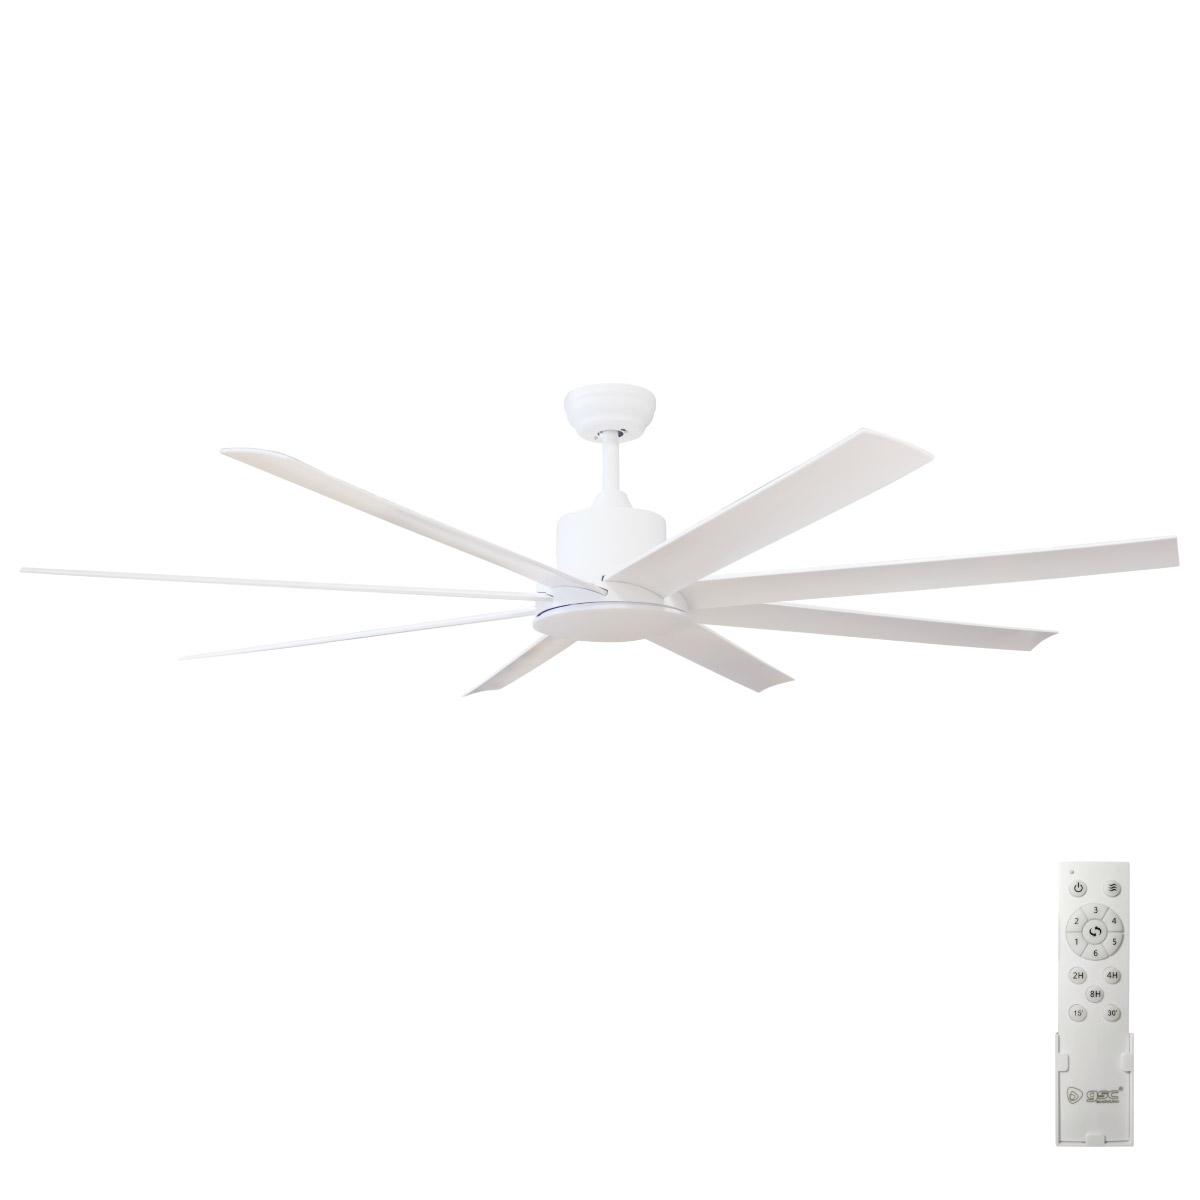 Diongo 65' DC ceiling fan with remote control 8 blades White